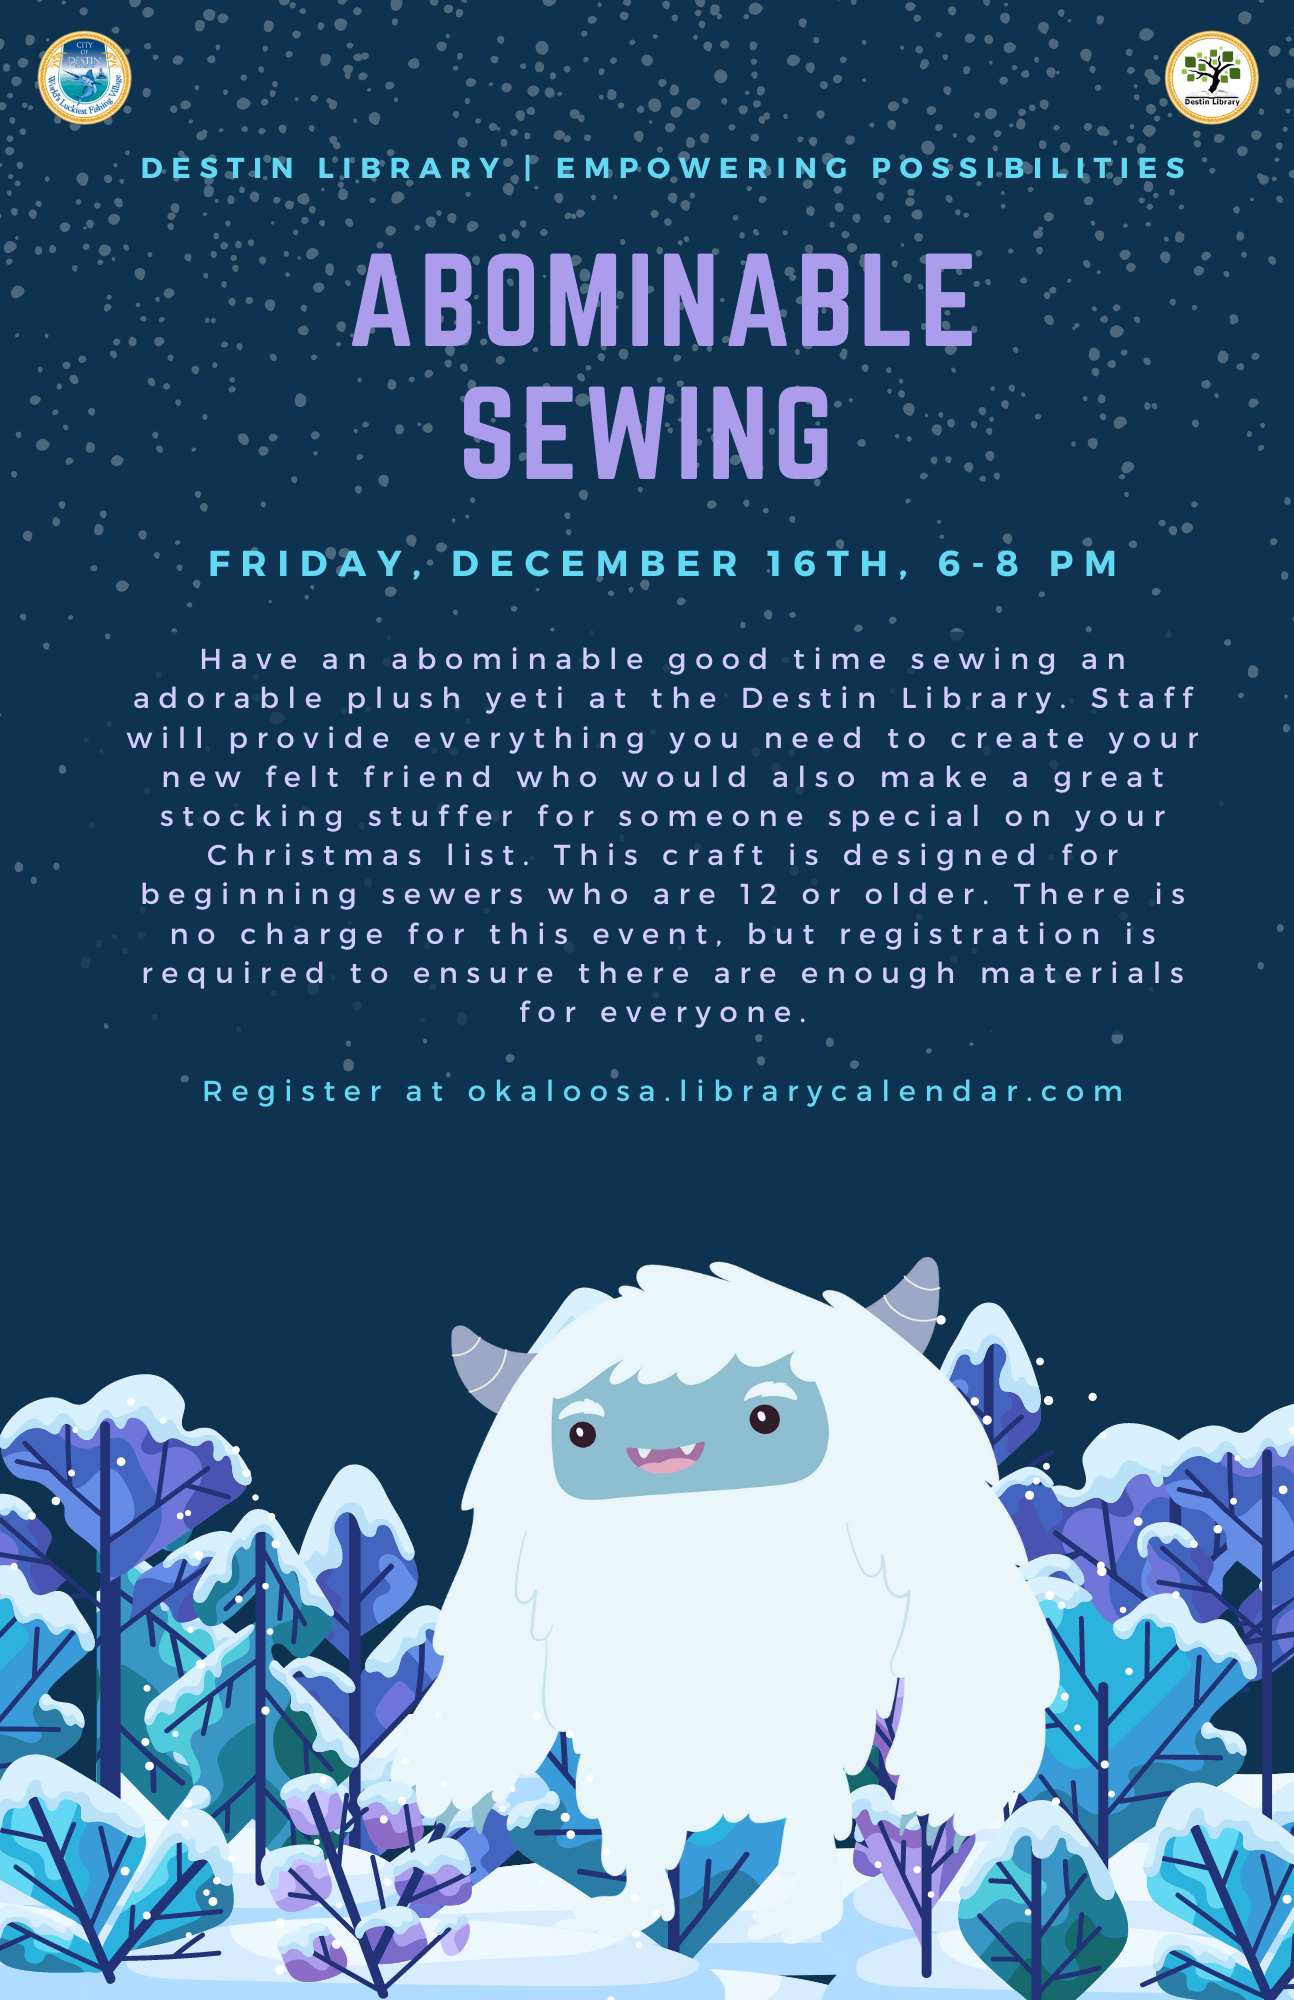 Abominable Sewing